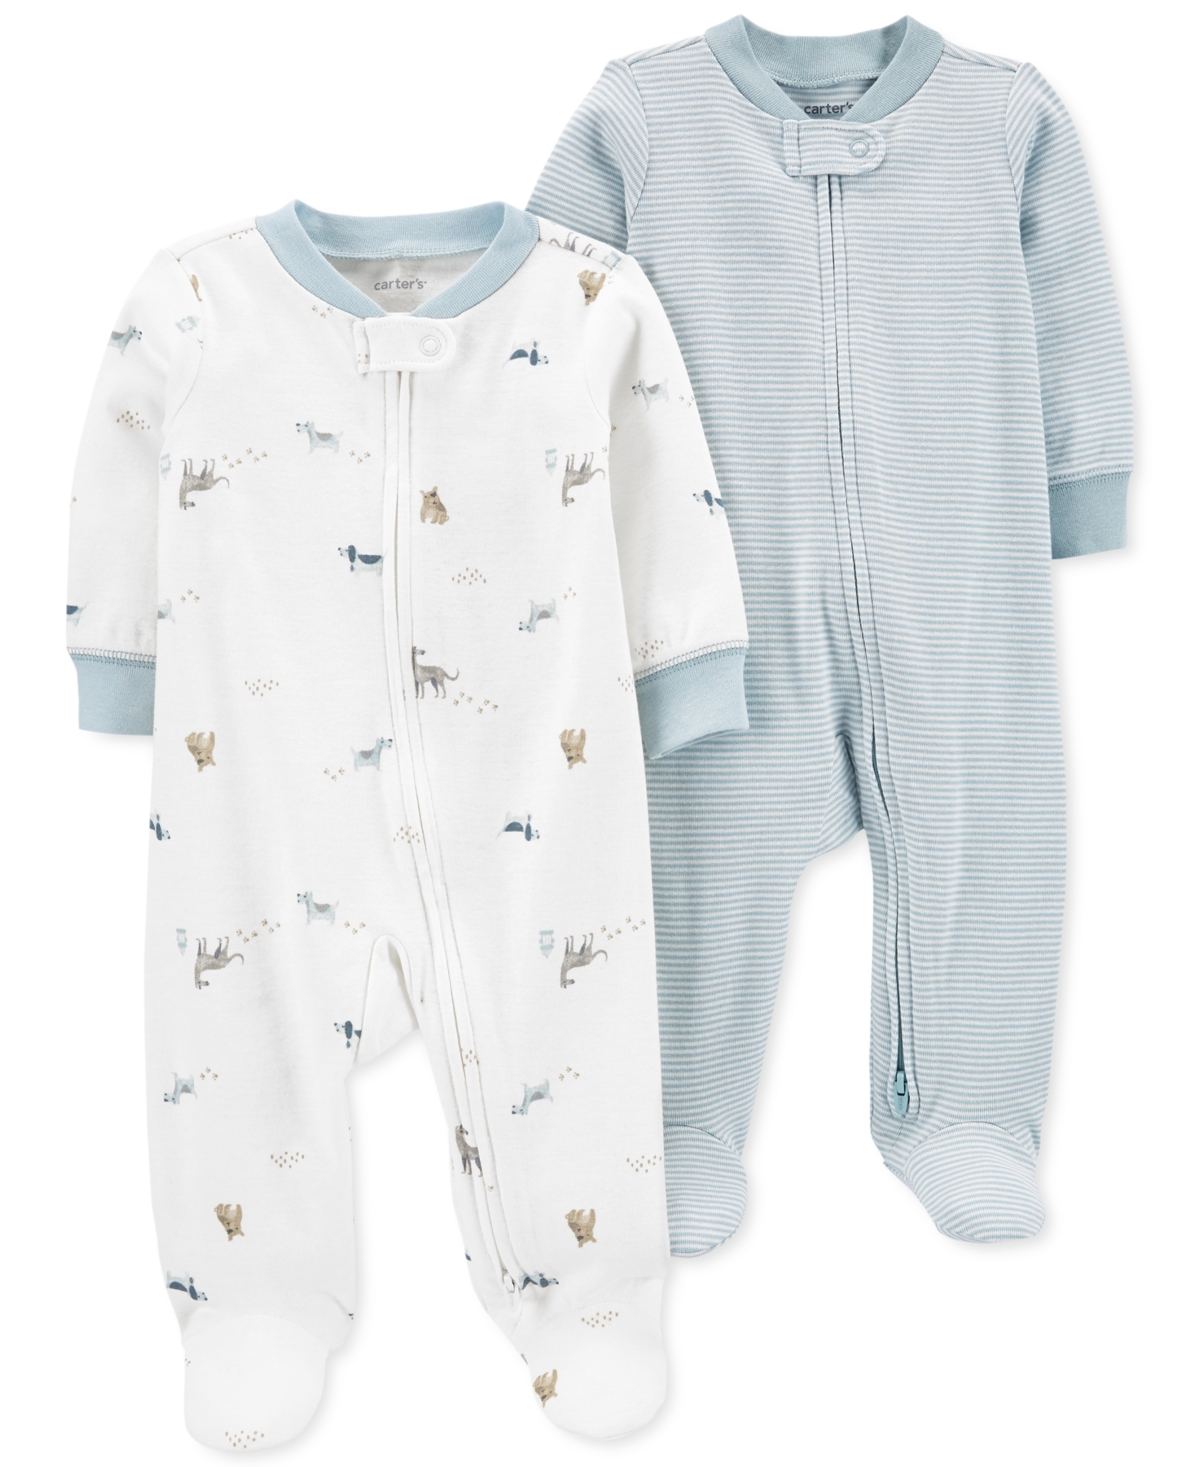 Carter's Baby Boys Dog Print Zip Up Footed Coveralls, Pack Of 2 In Assorted